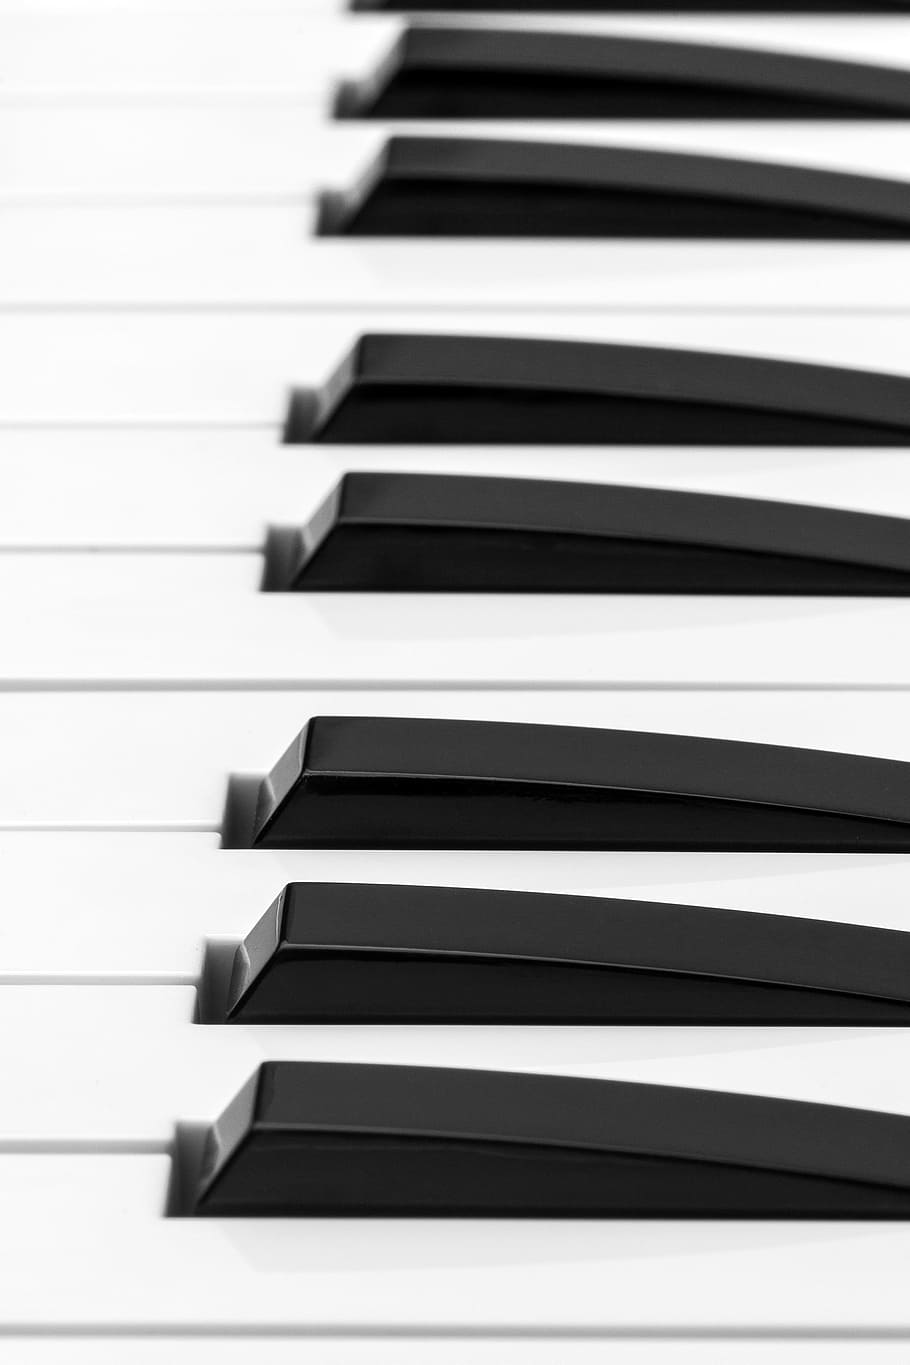 White and Black Piano Keys, black and white, close-up, instrument